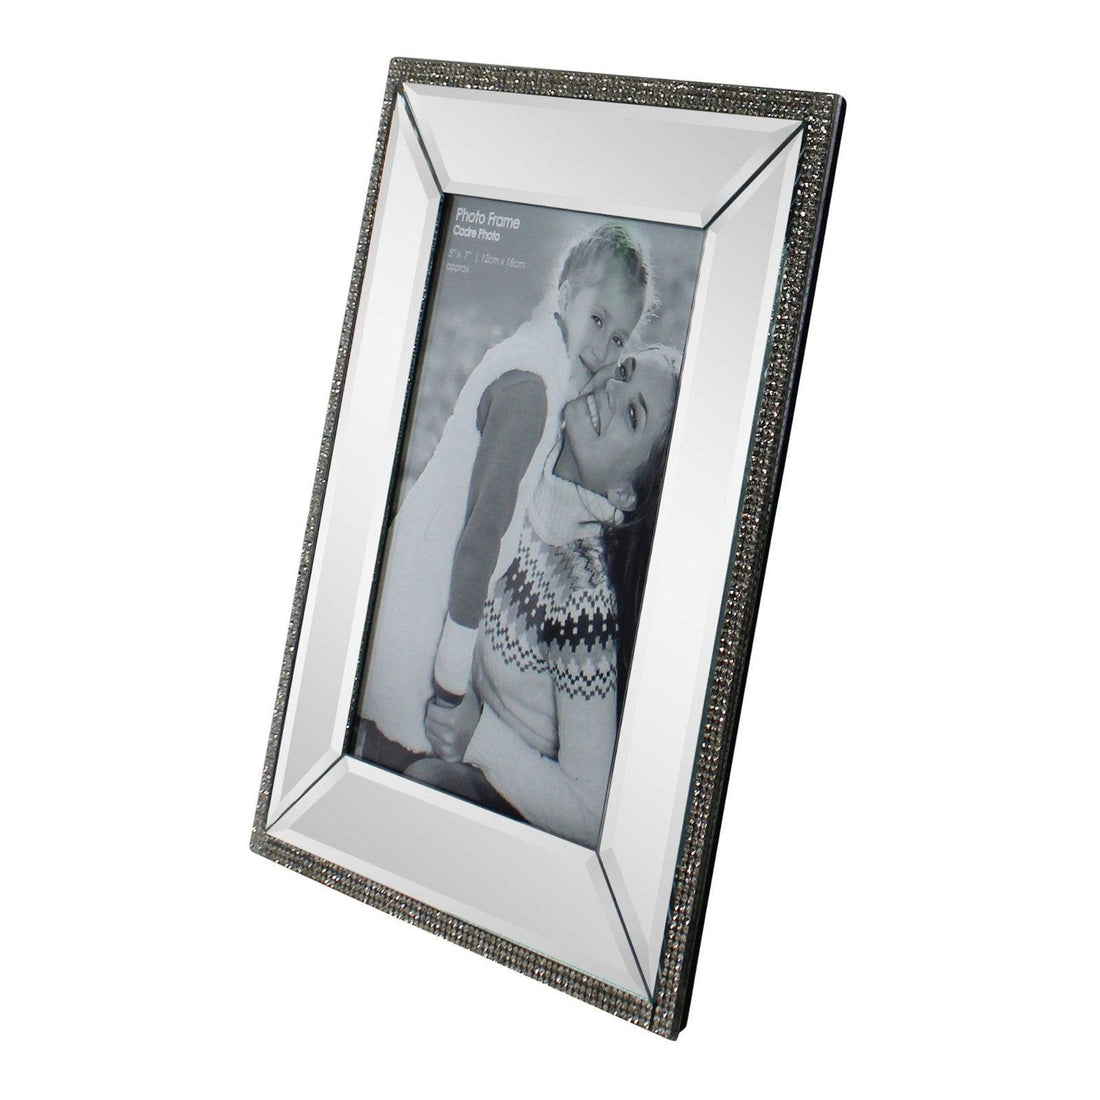 5 x 7 Mirrored Freestanding Photo Frame With Crystal Detail - £20.99 - Photo Frames 